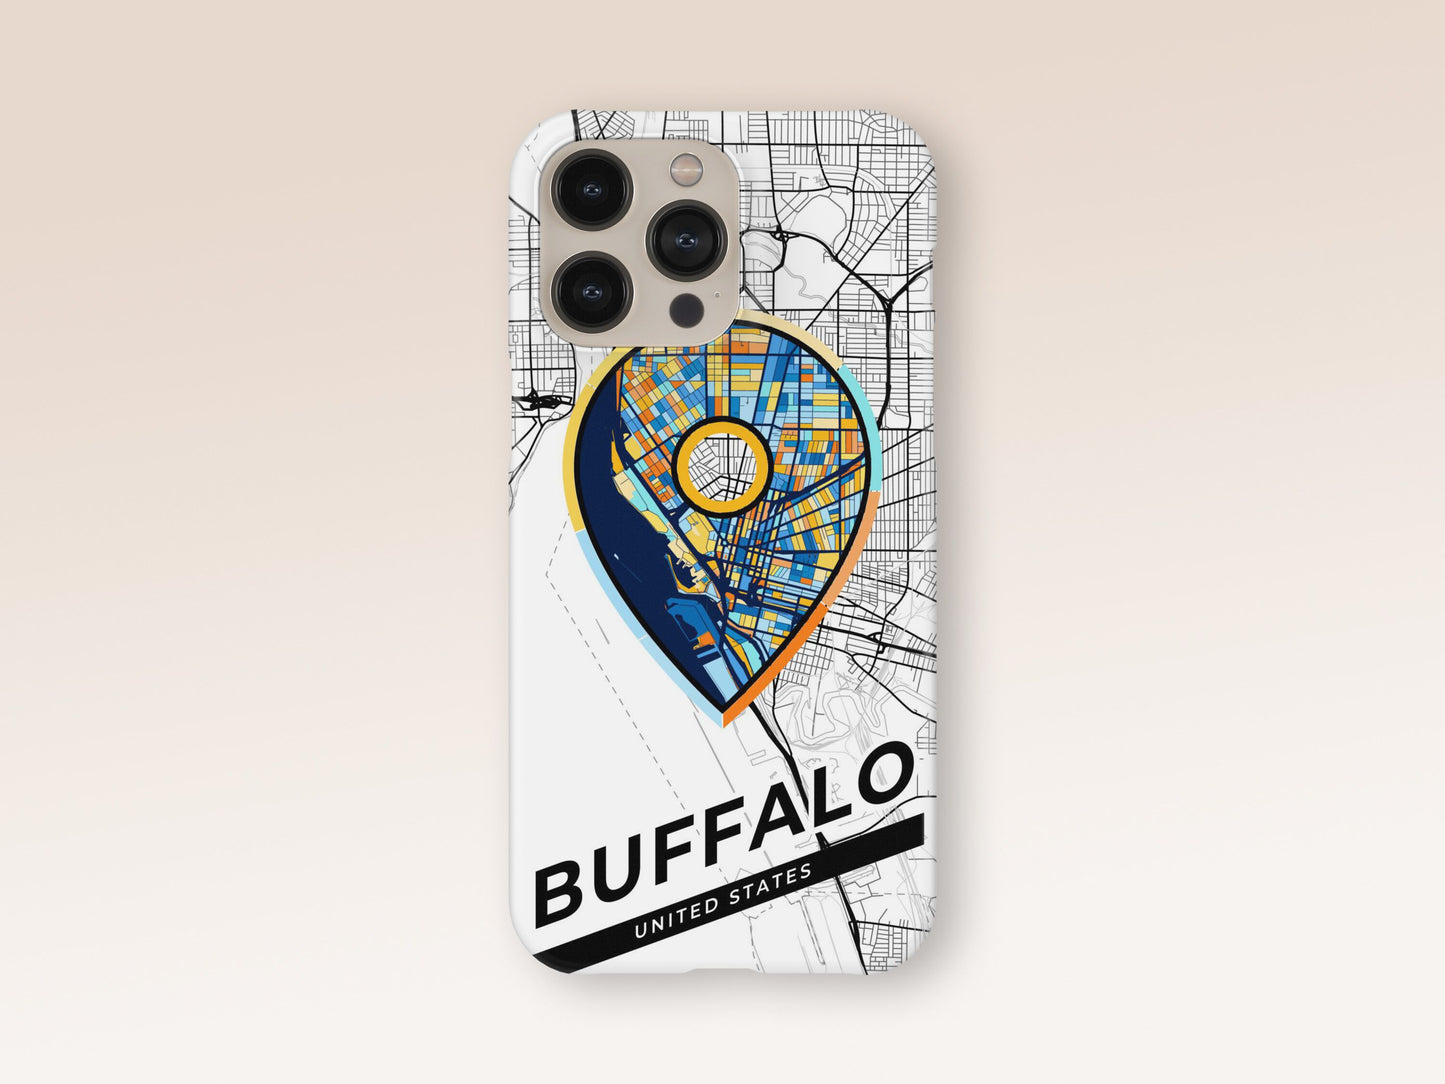 Buffalo New York slim phone case with colorful icon. Birthday, wedding or housewarming gift. Couple match cases. 1